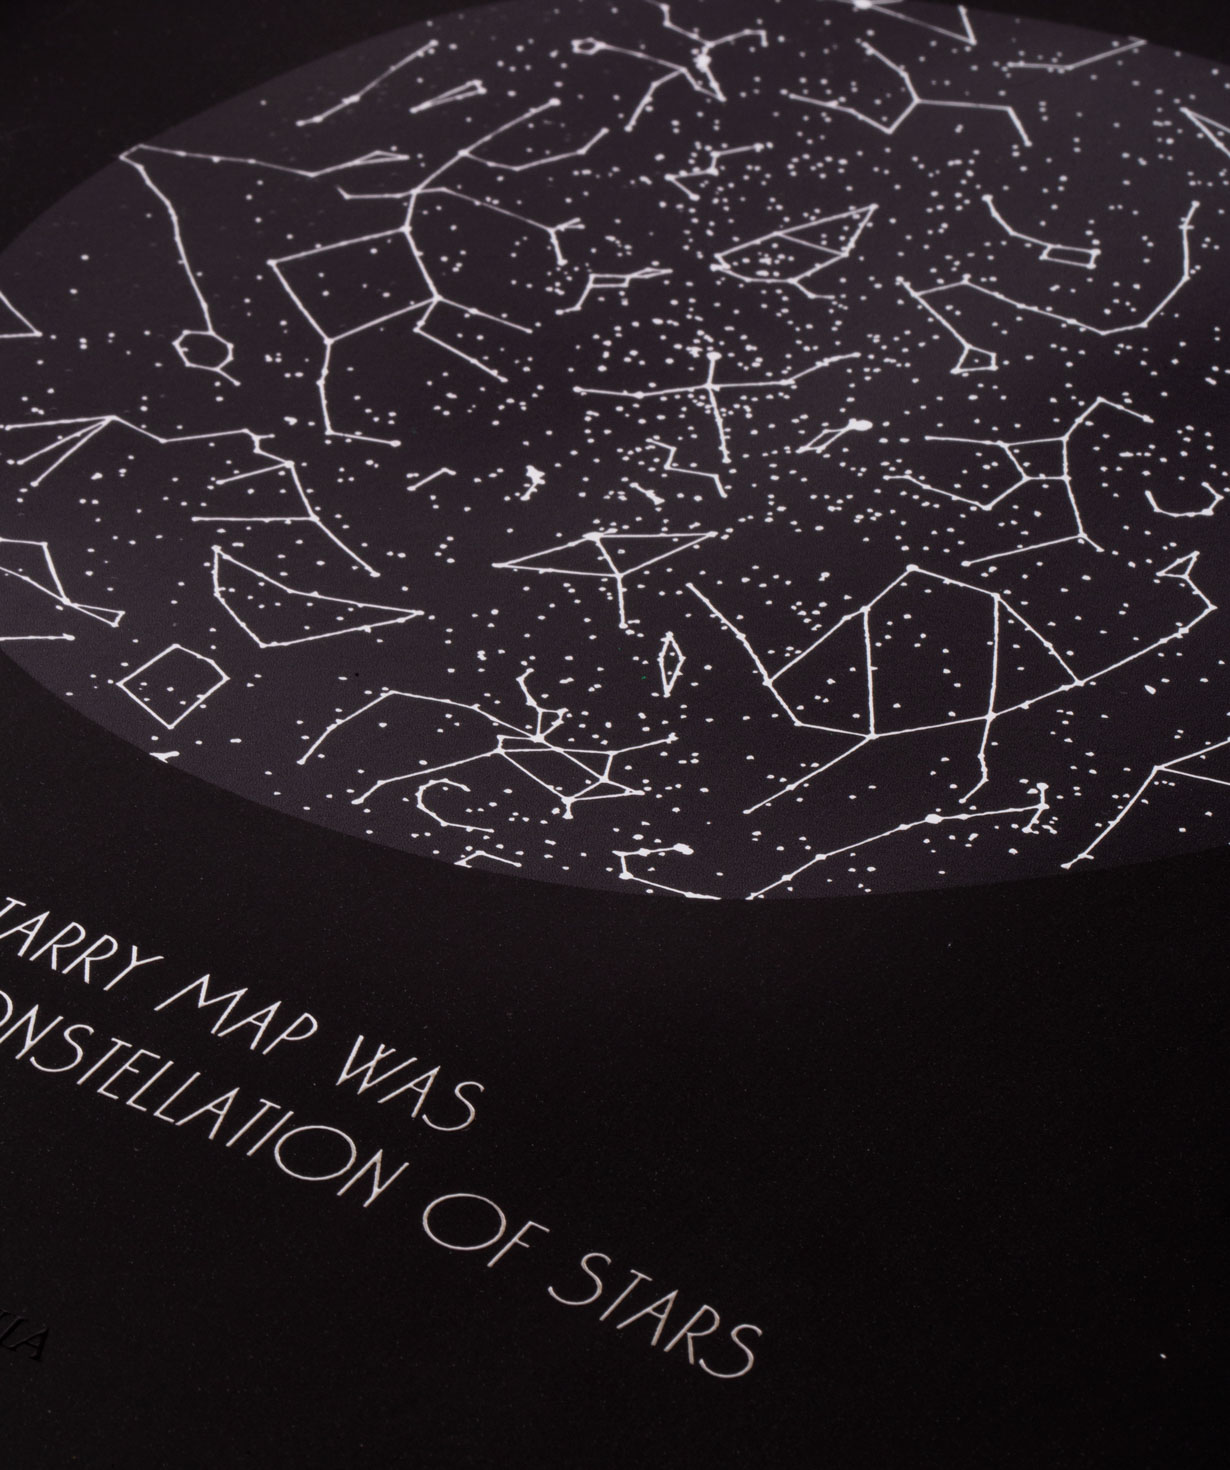 Individual starry map A3 Black Edition (Limited)